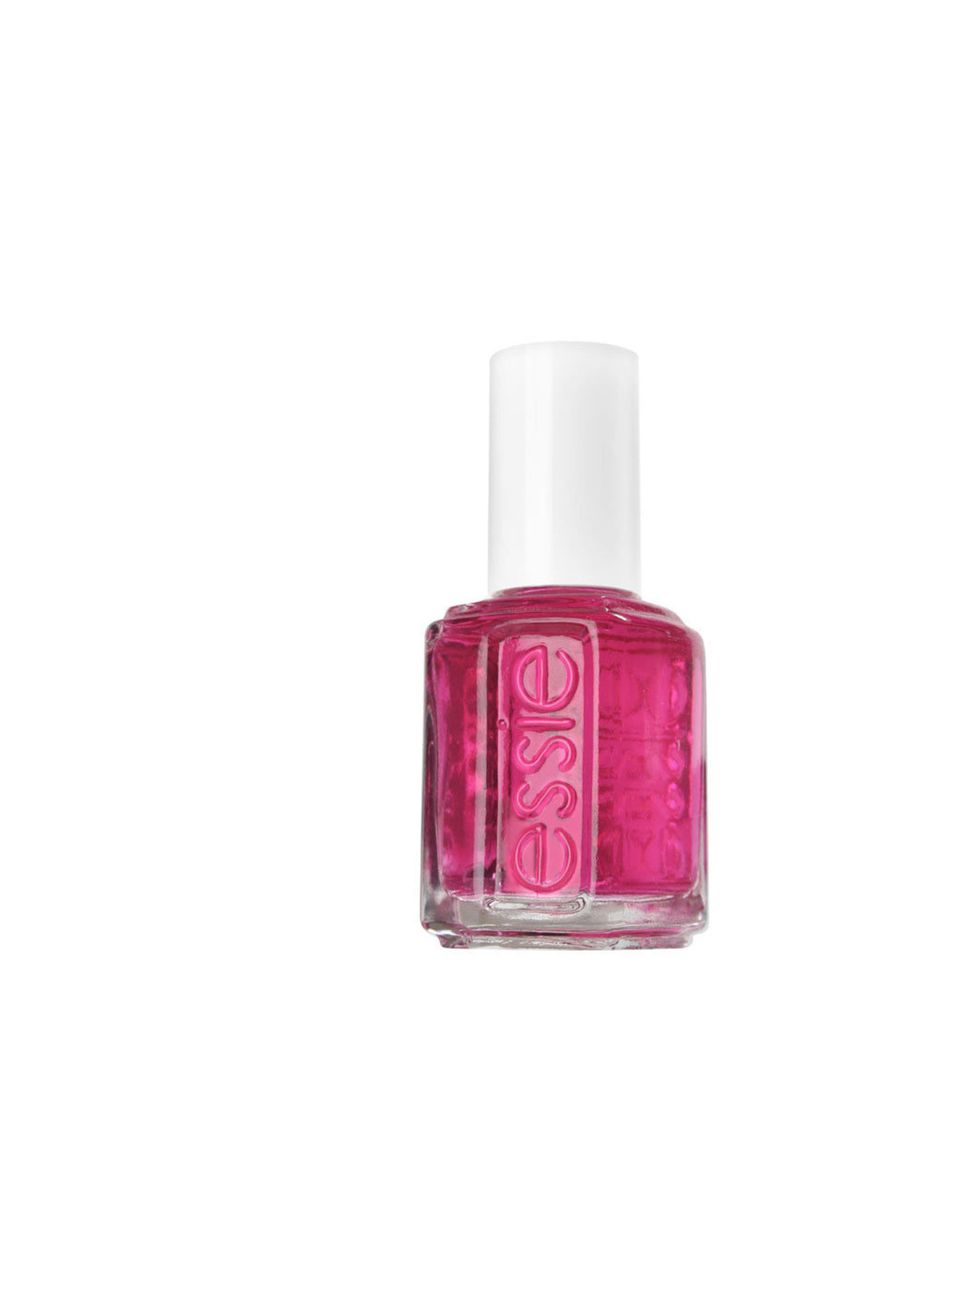 <p>Essie Nail Polish in Cherry Pop, £9.95 at <a href="http://www.nailsbymail.co.uk/store/home/cherry-pop">Nails by Mail</a></p>